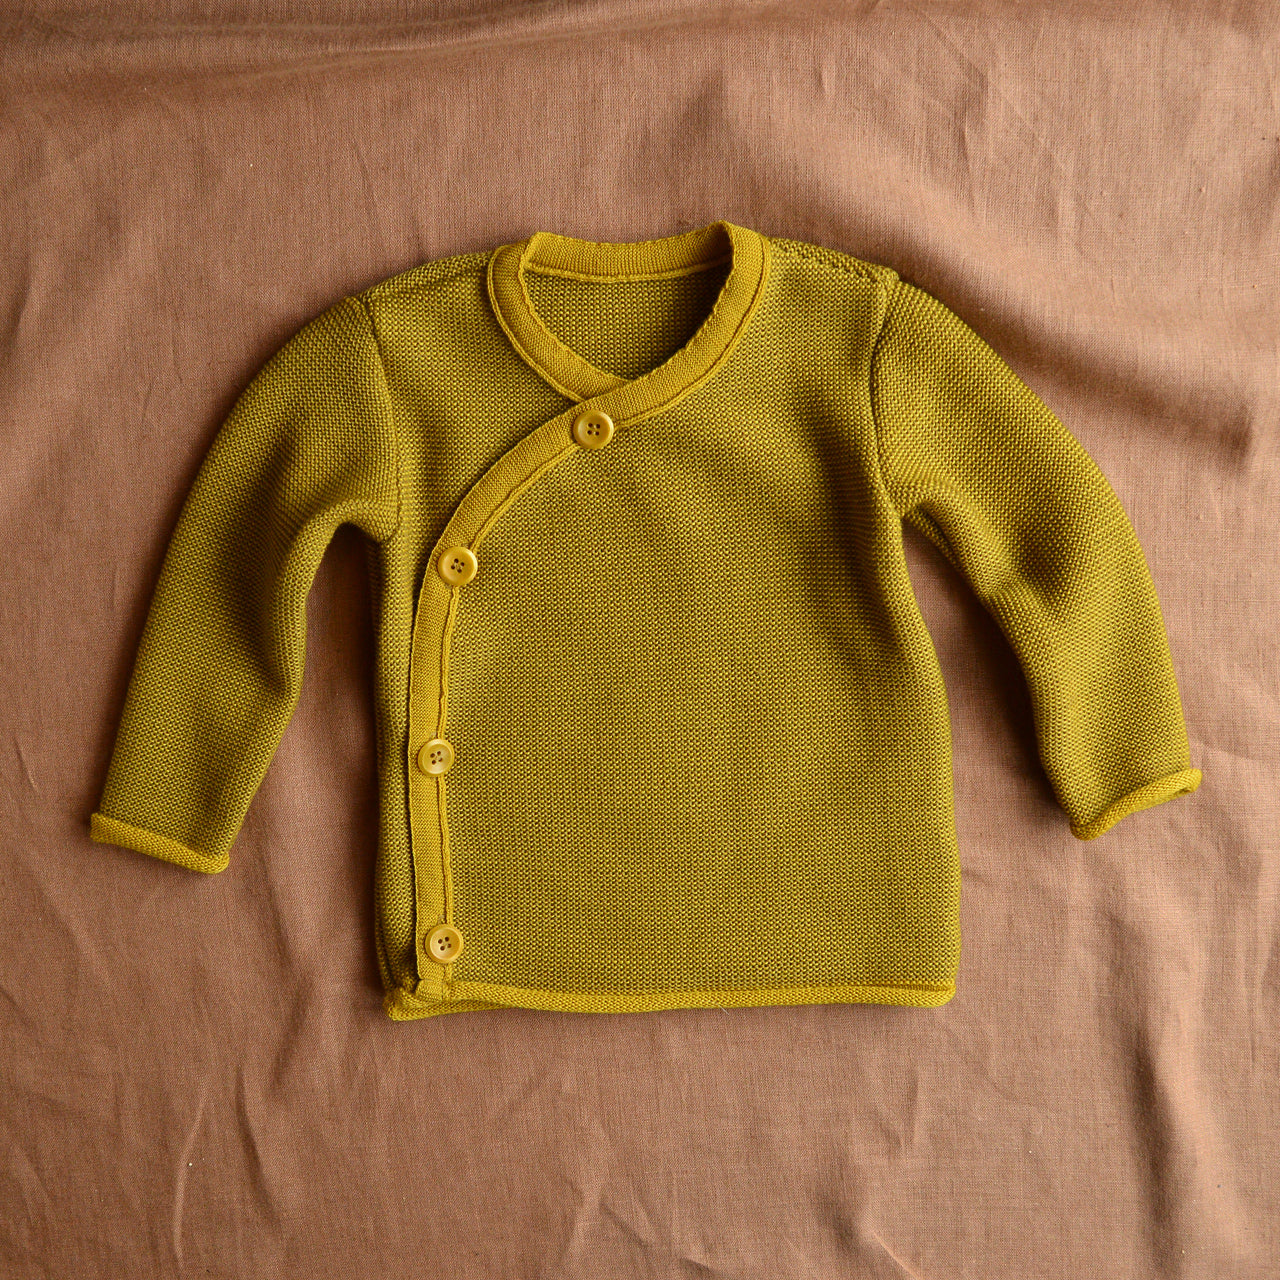 Merino Baby Jacket - Curry/Gold (3-6m) *Retired Colour*